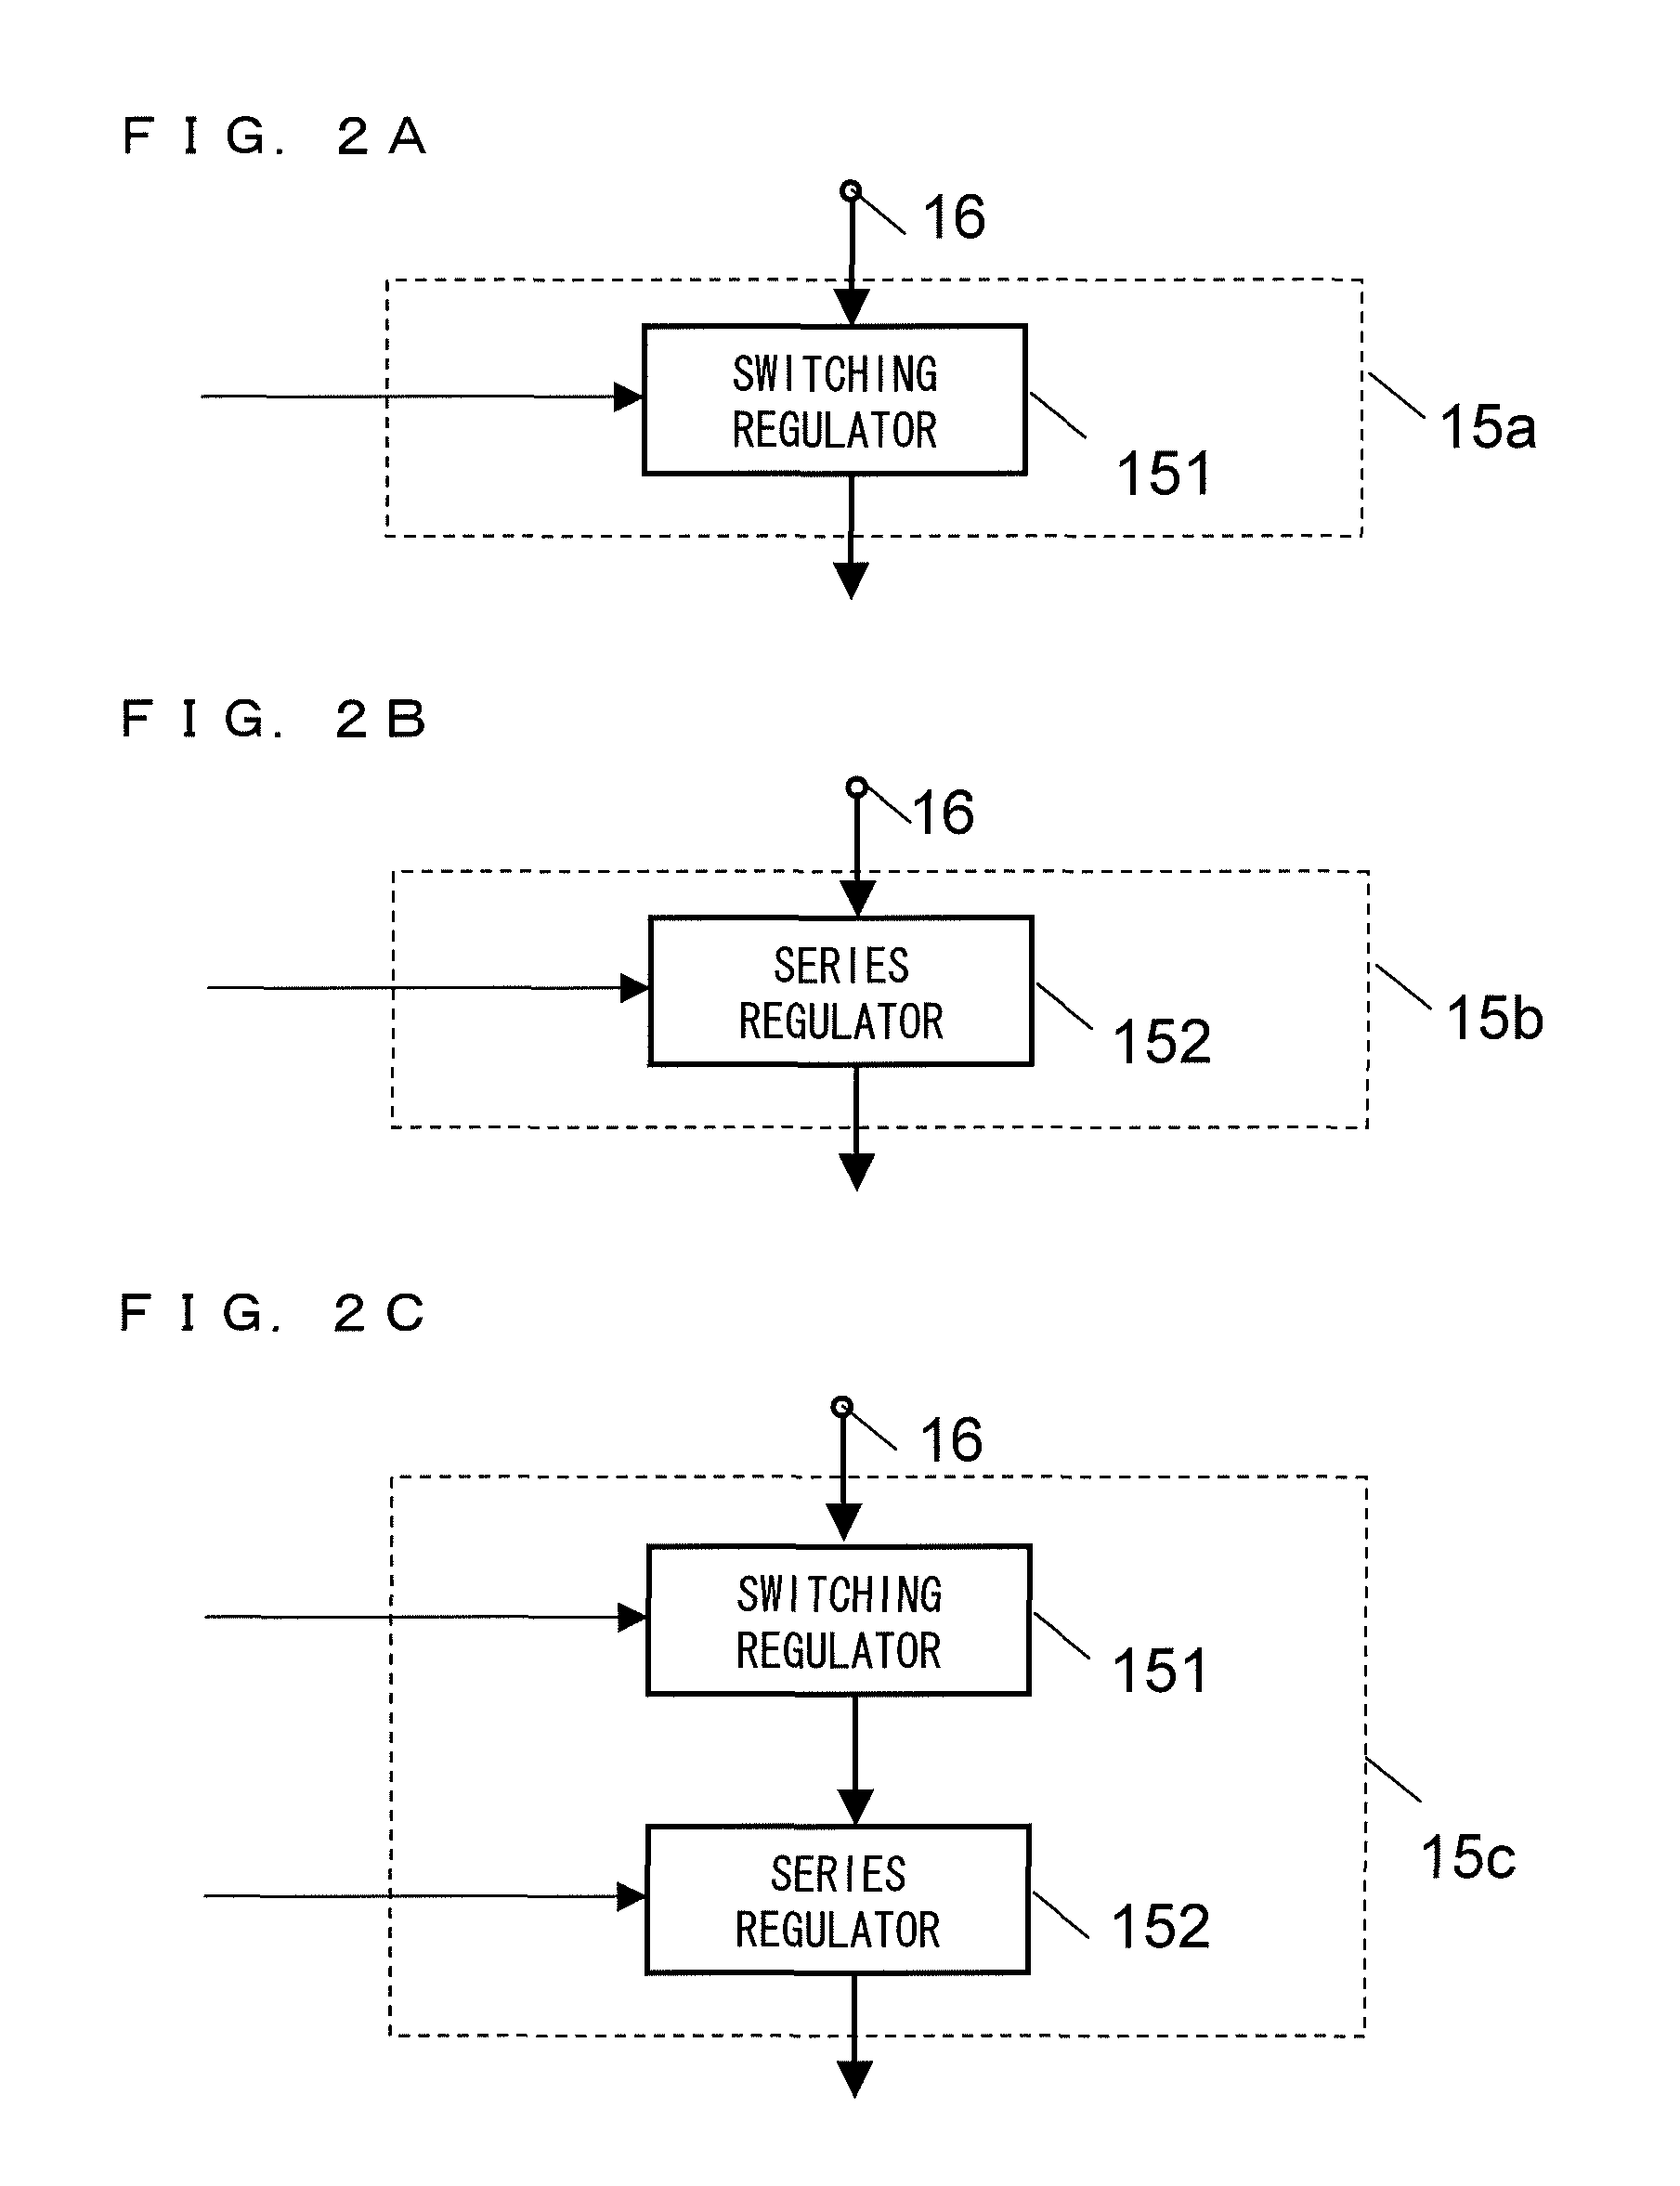 Transmission circuit for bias control of power amplifier